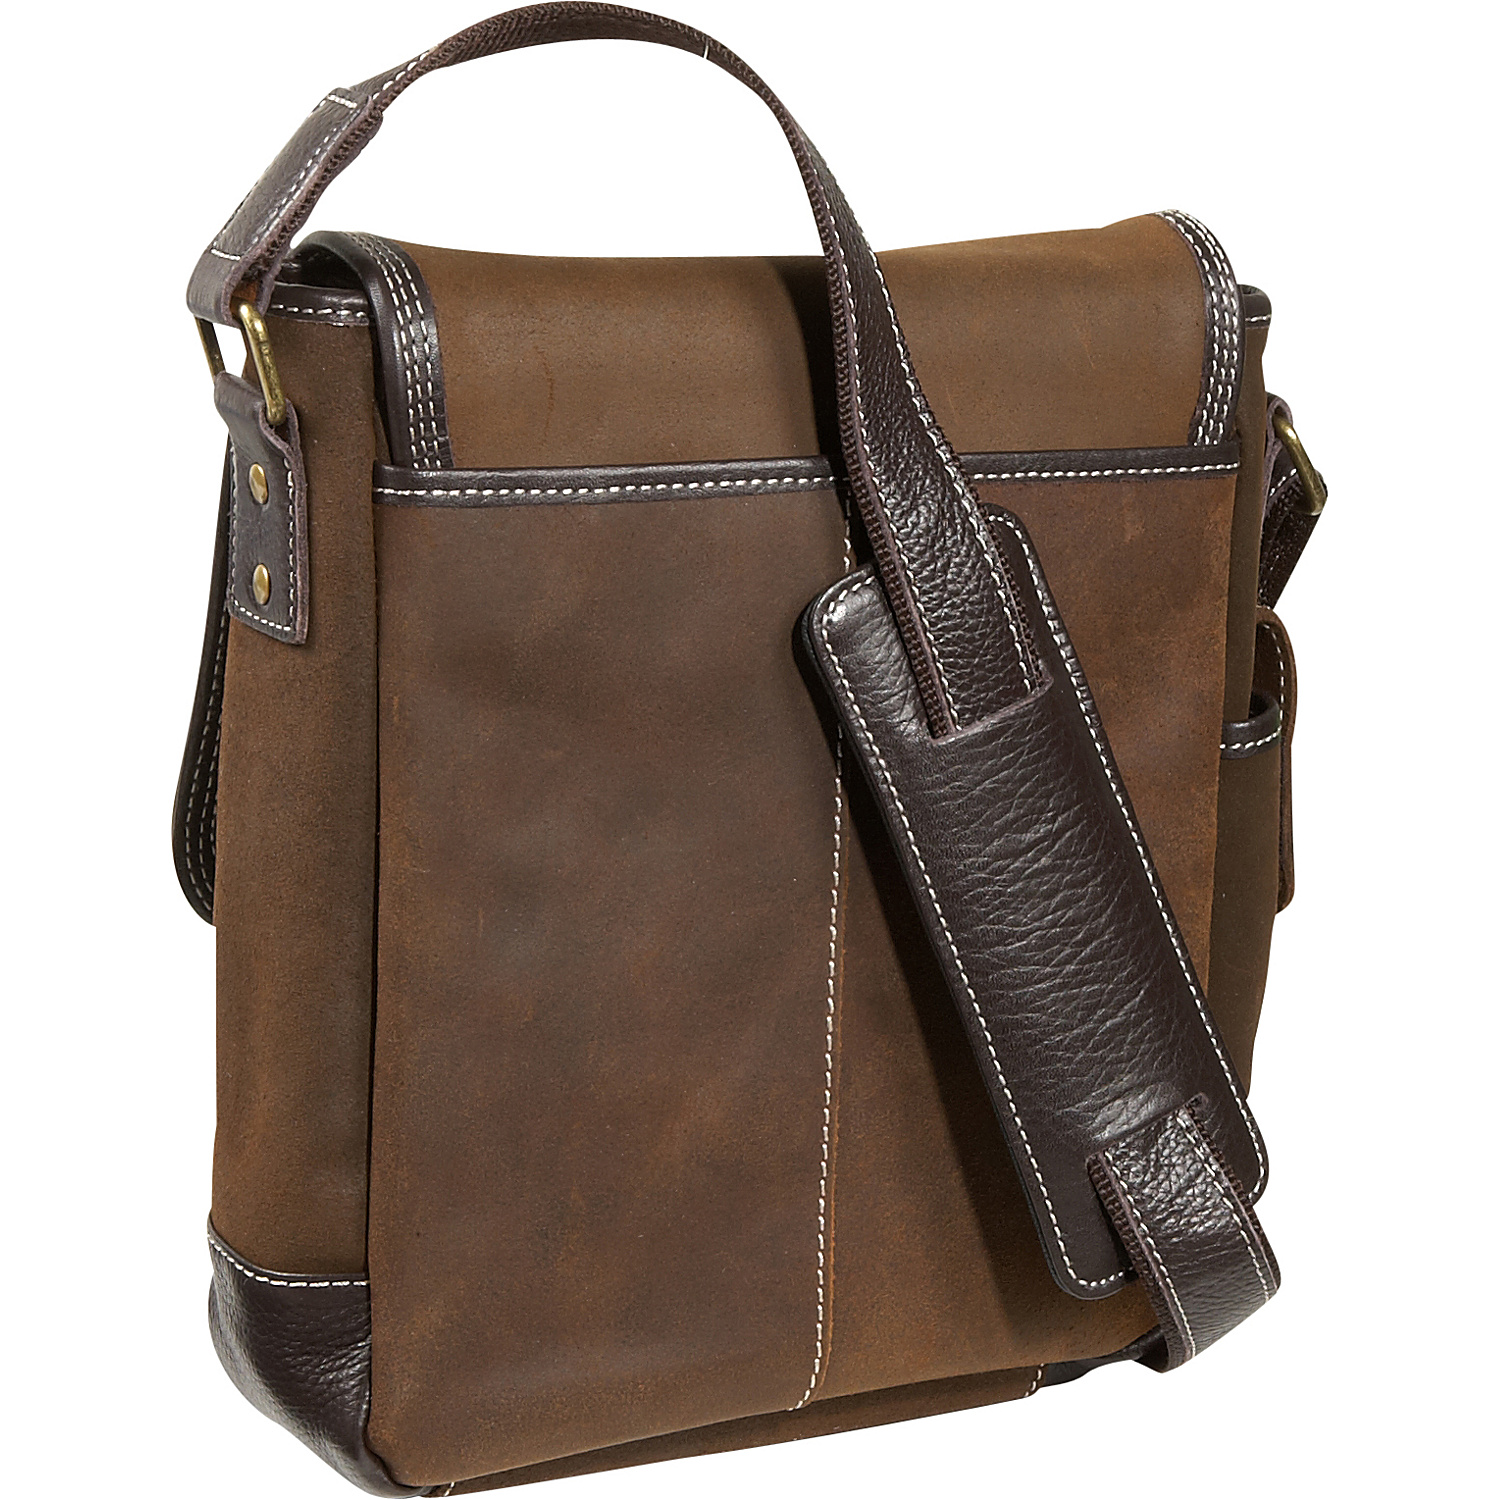 The Outback Sling iPad / Netbook Messenger